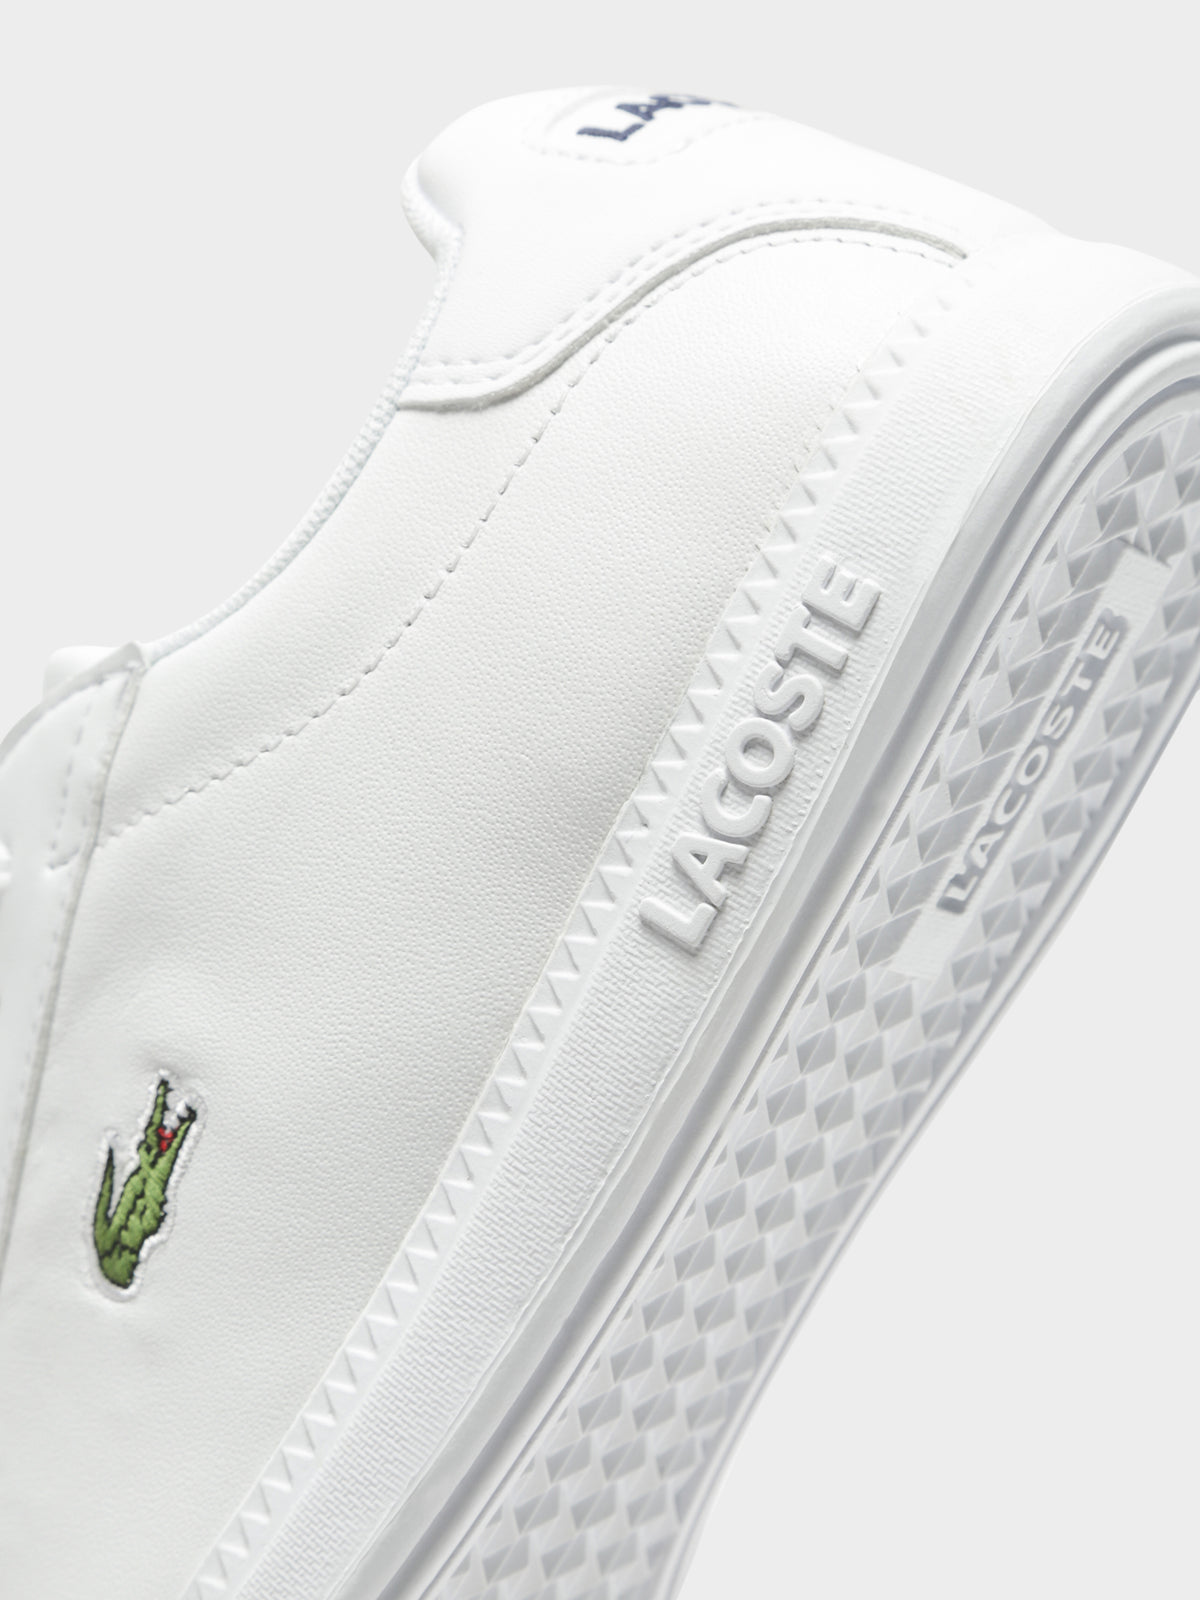 Womens Graduate BL 1 Sneakers in White